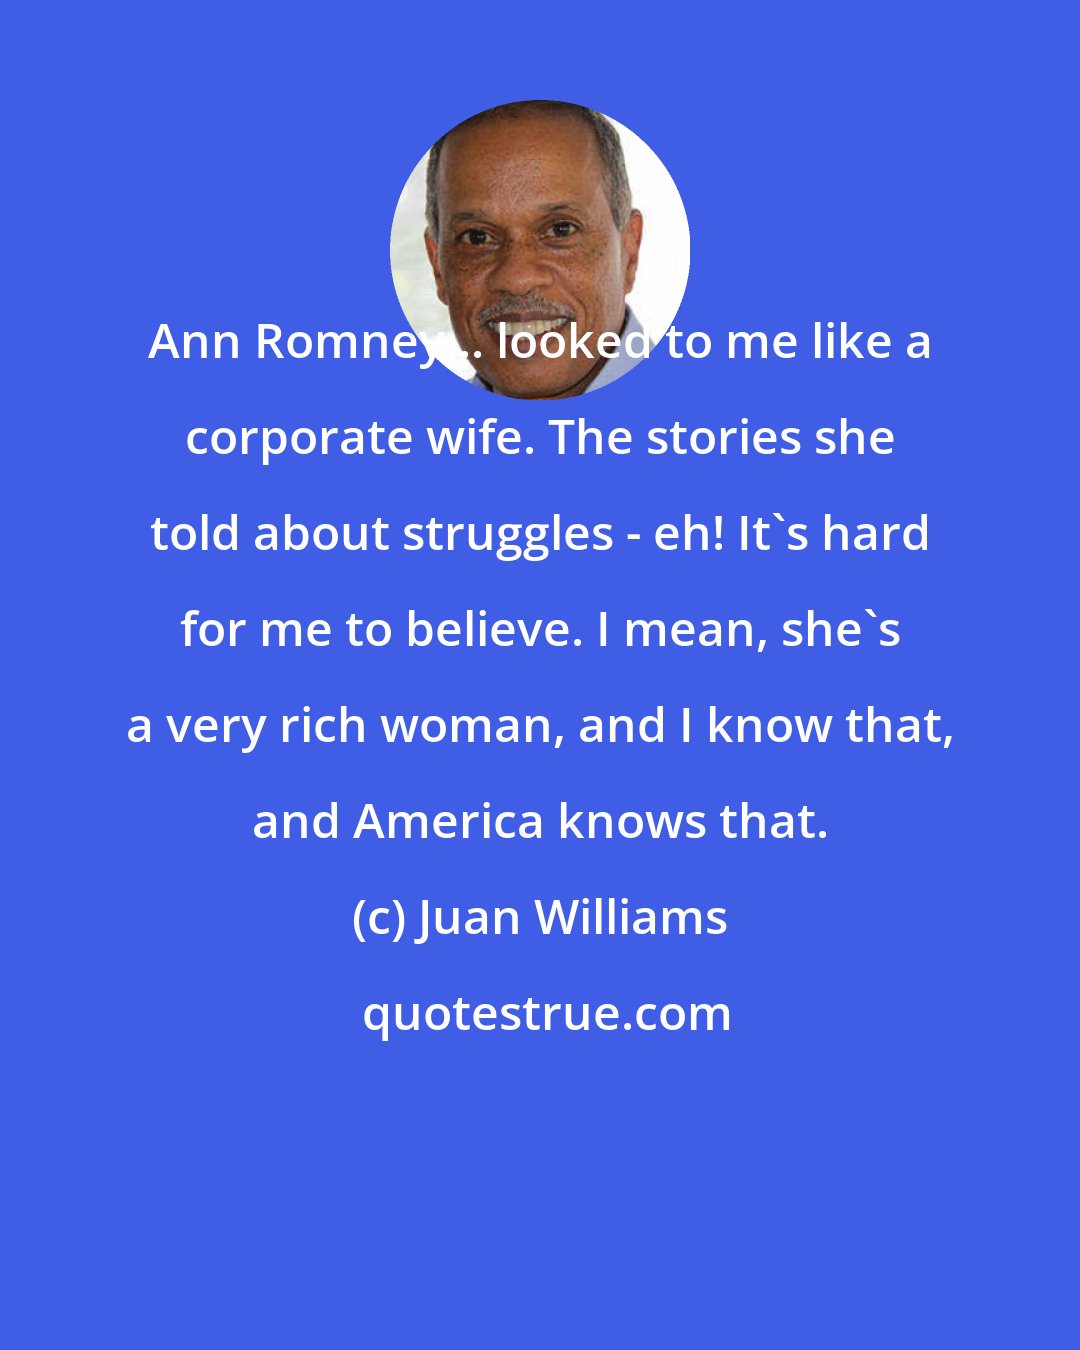 Juan Williams: Ann Romney... looked to me like a corporate wife. The stories she told about struggles - eh! It's hard for me to believe. I mean, she's a very rich woman, and I know that, and America knows that.